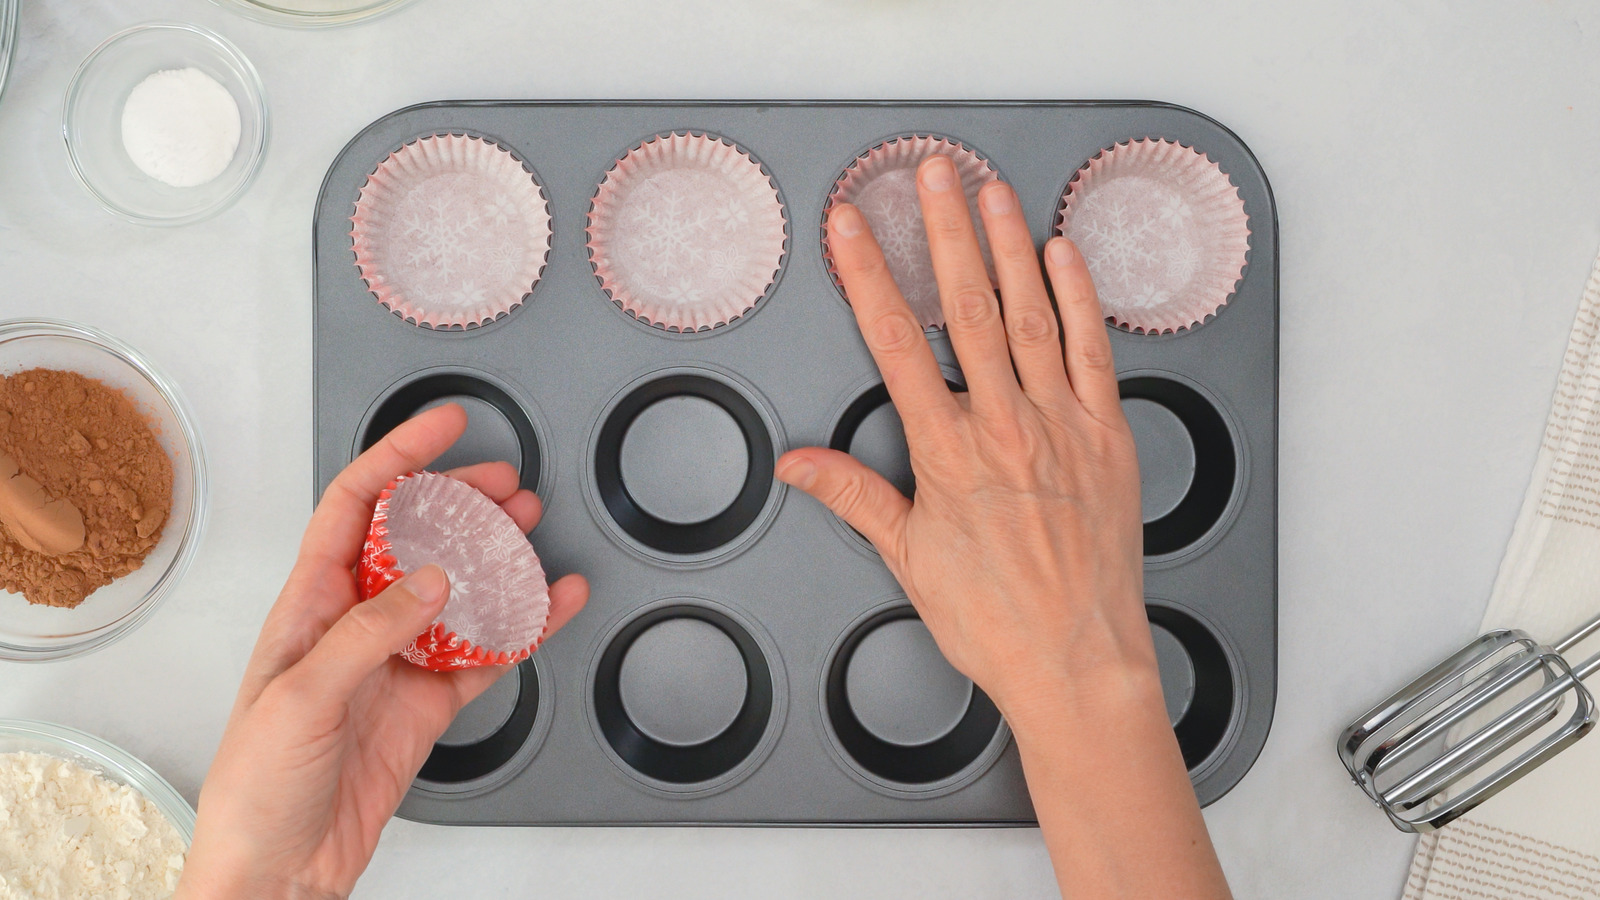 MommiNation  No muffin liners, don't worry, here's an easy hack